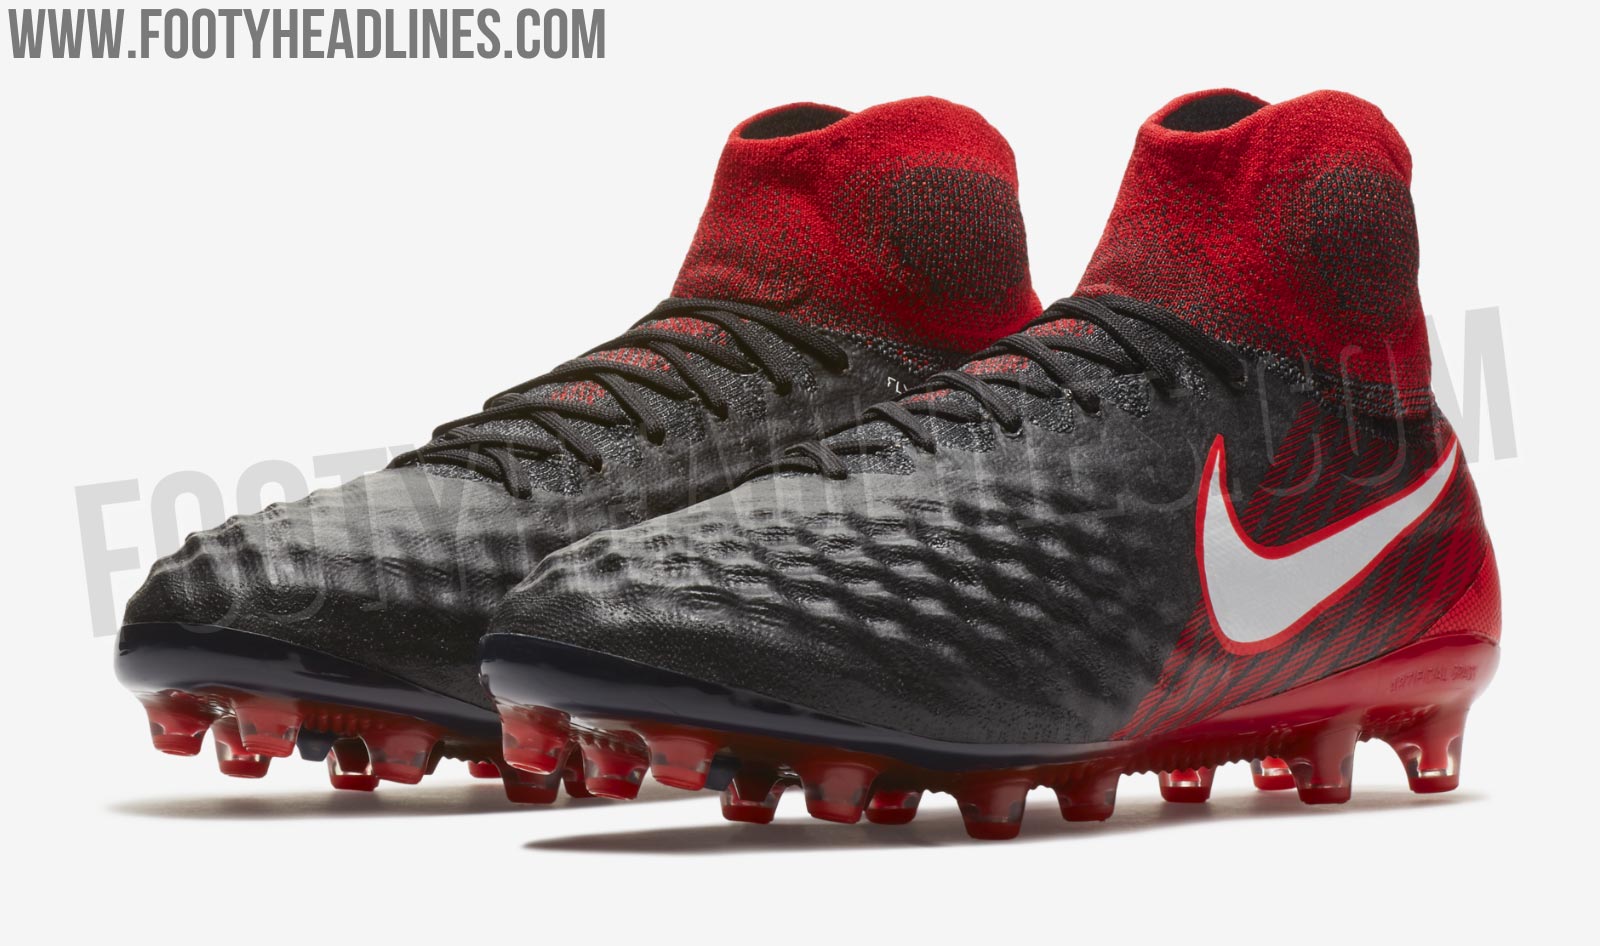 Nike Magista Obra Fire Pack Boots Revealed - Footy Headlines